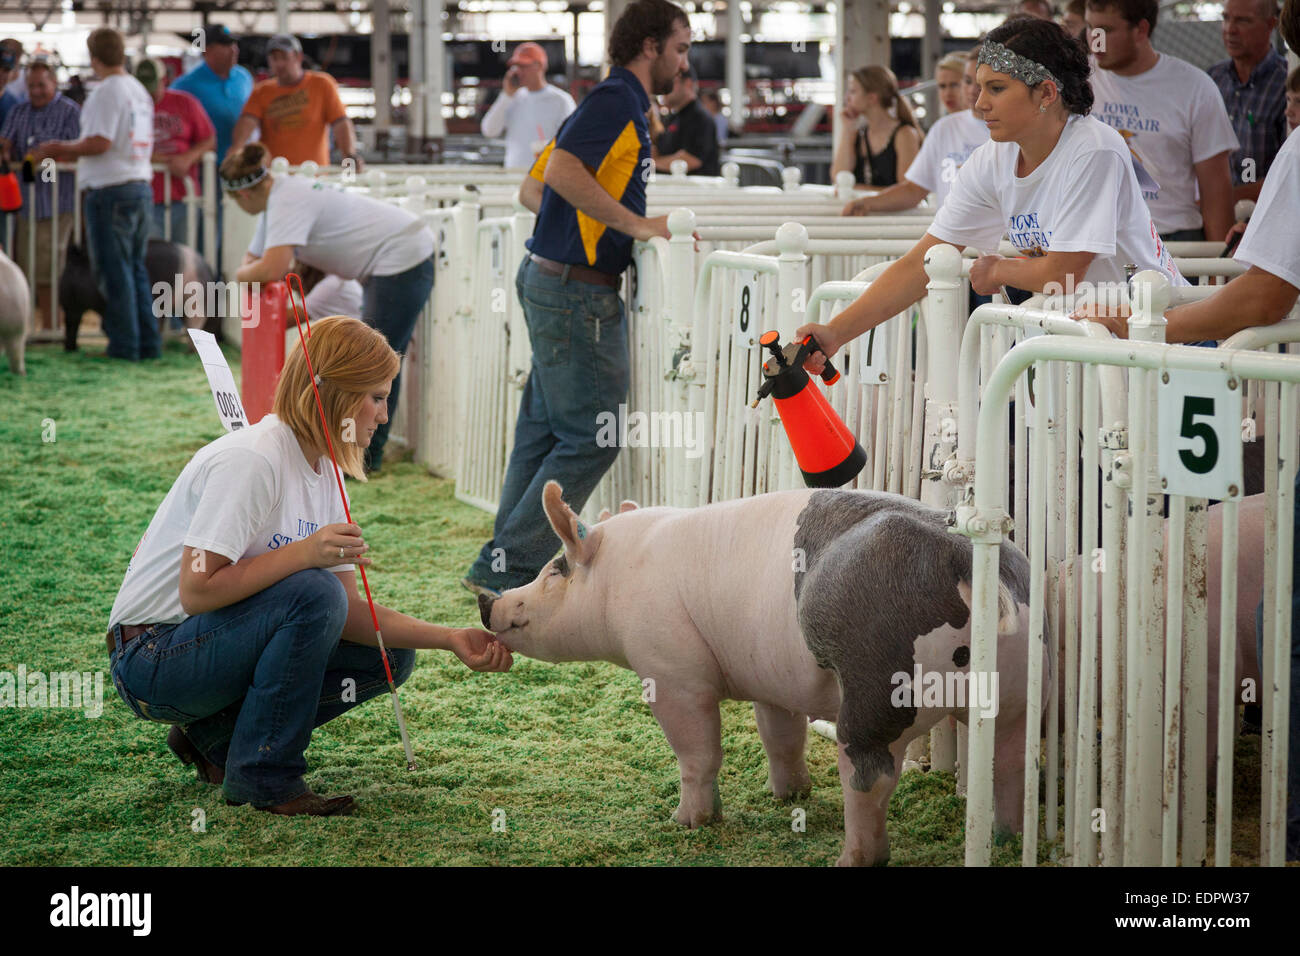 Misting a pig during the swine show. Iowa State Fair, Des Moines. Stock Photo